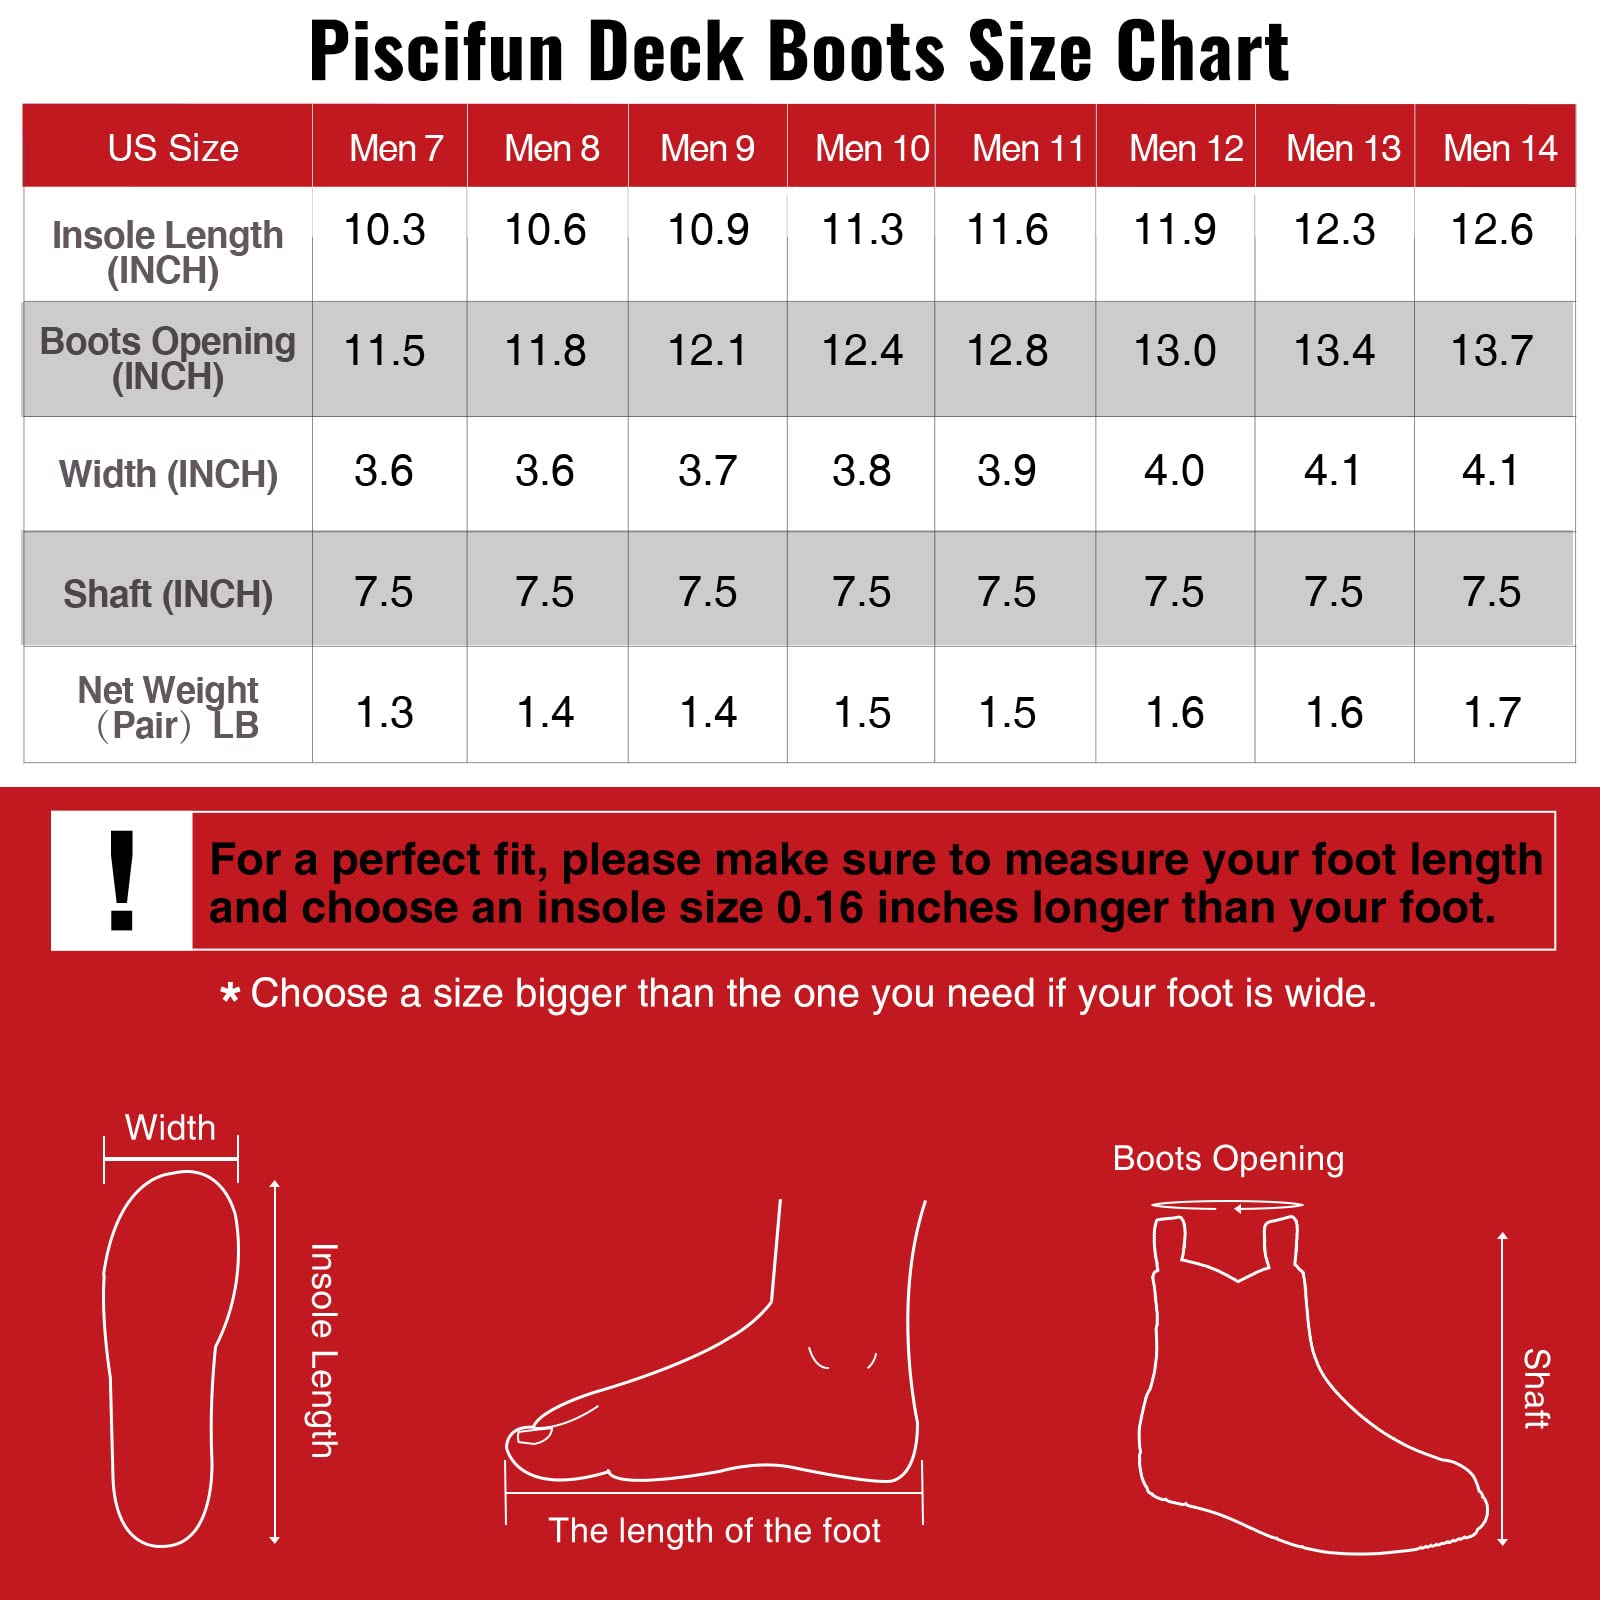 Piscifun Men's Fishing Deck Boots, Waterproof Rain Boots, Anti-Slip Rubber Boots with Breathable Neoprene Lining